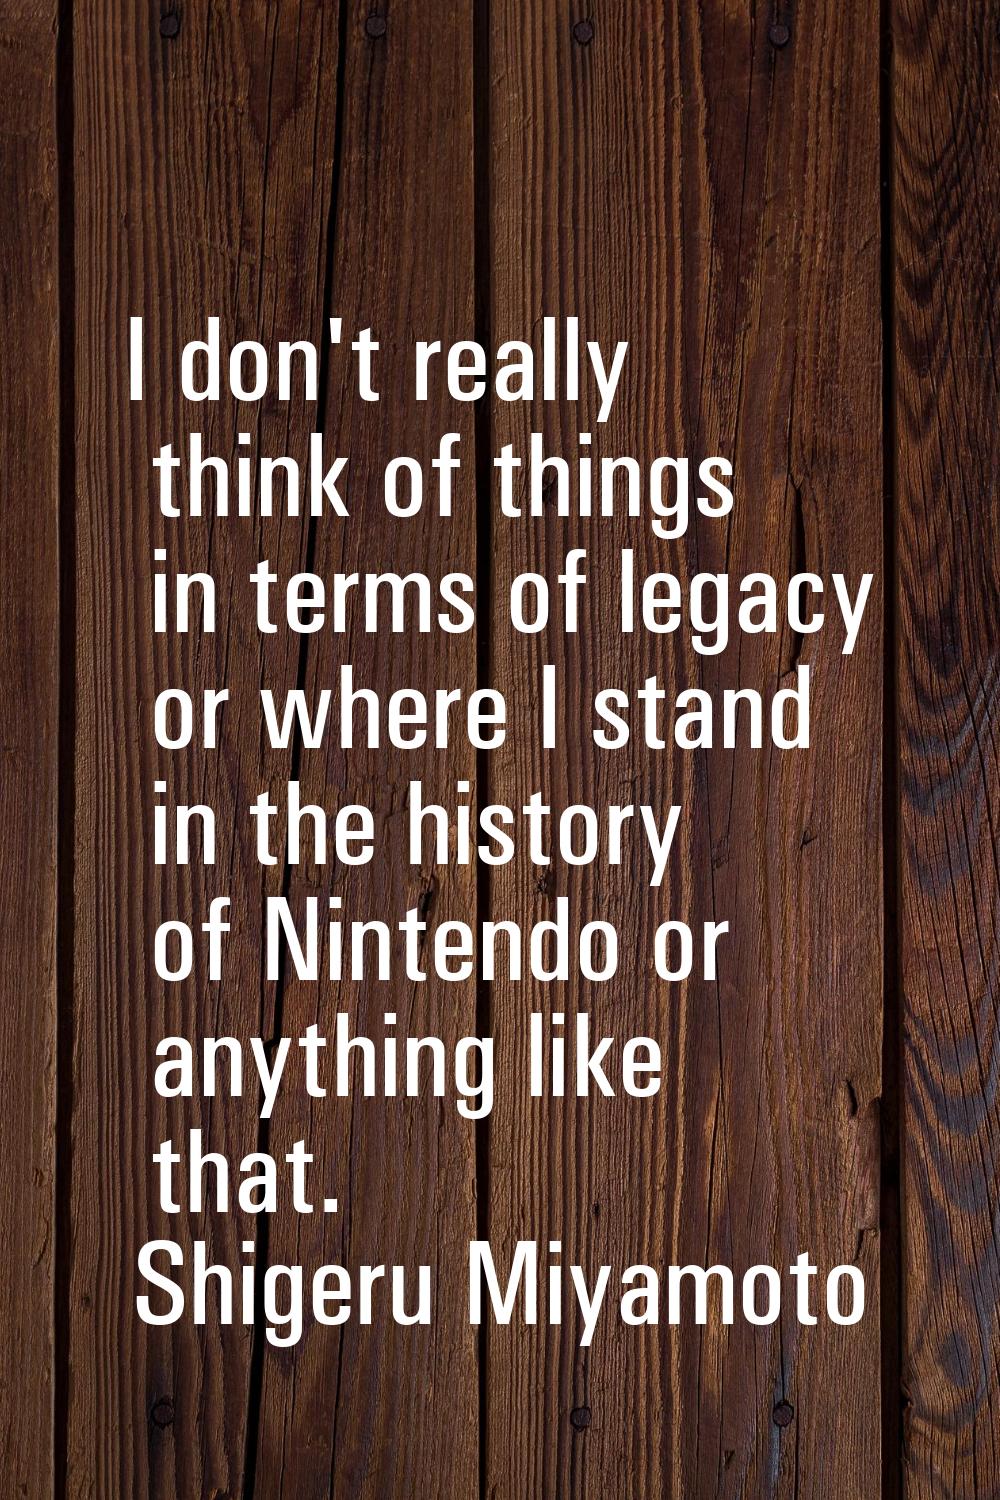 I don't really think of things in terms of legacy or where I stand in the history of Nintendo or an